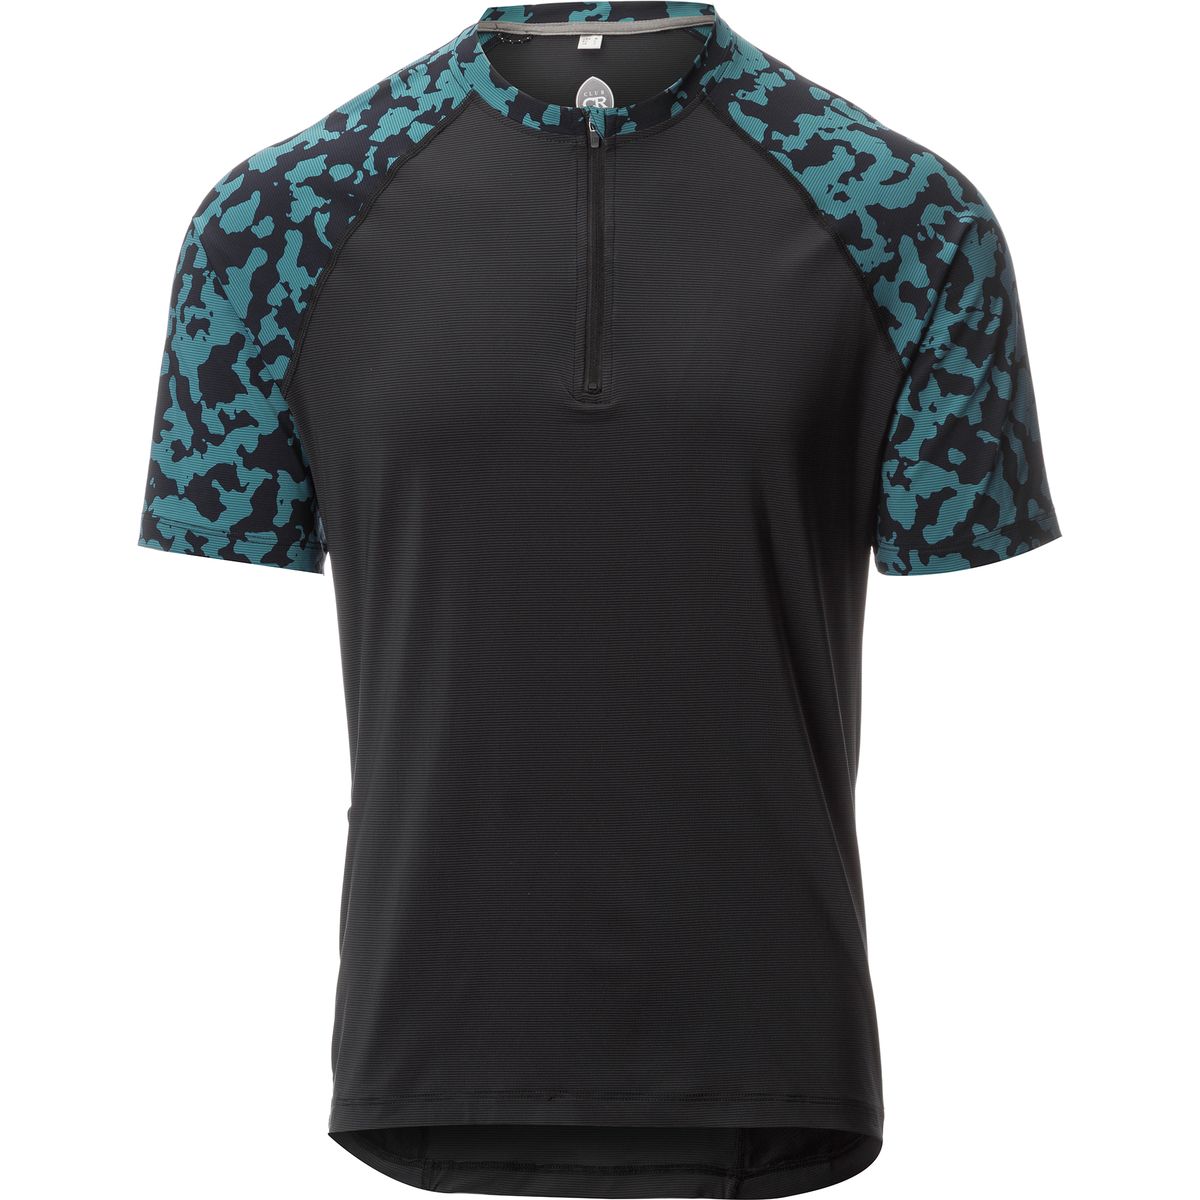 Club Ride Apparel Camotion Jersey Men's